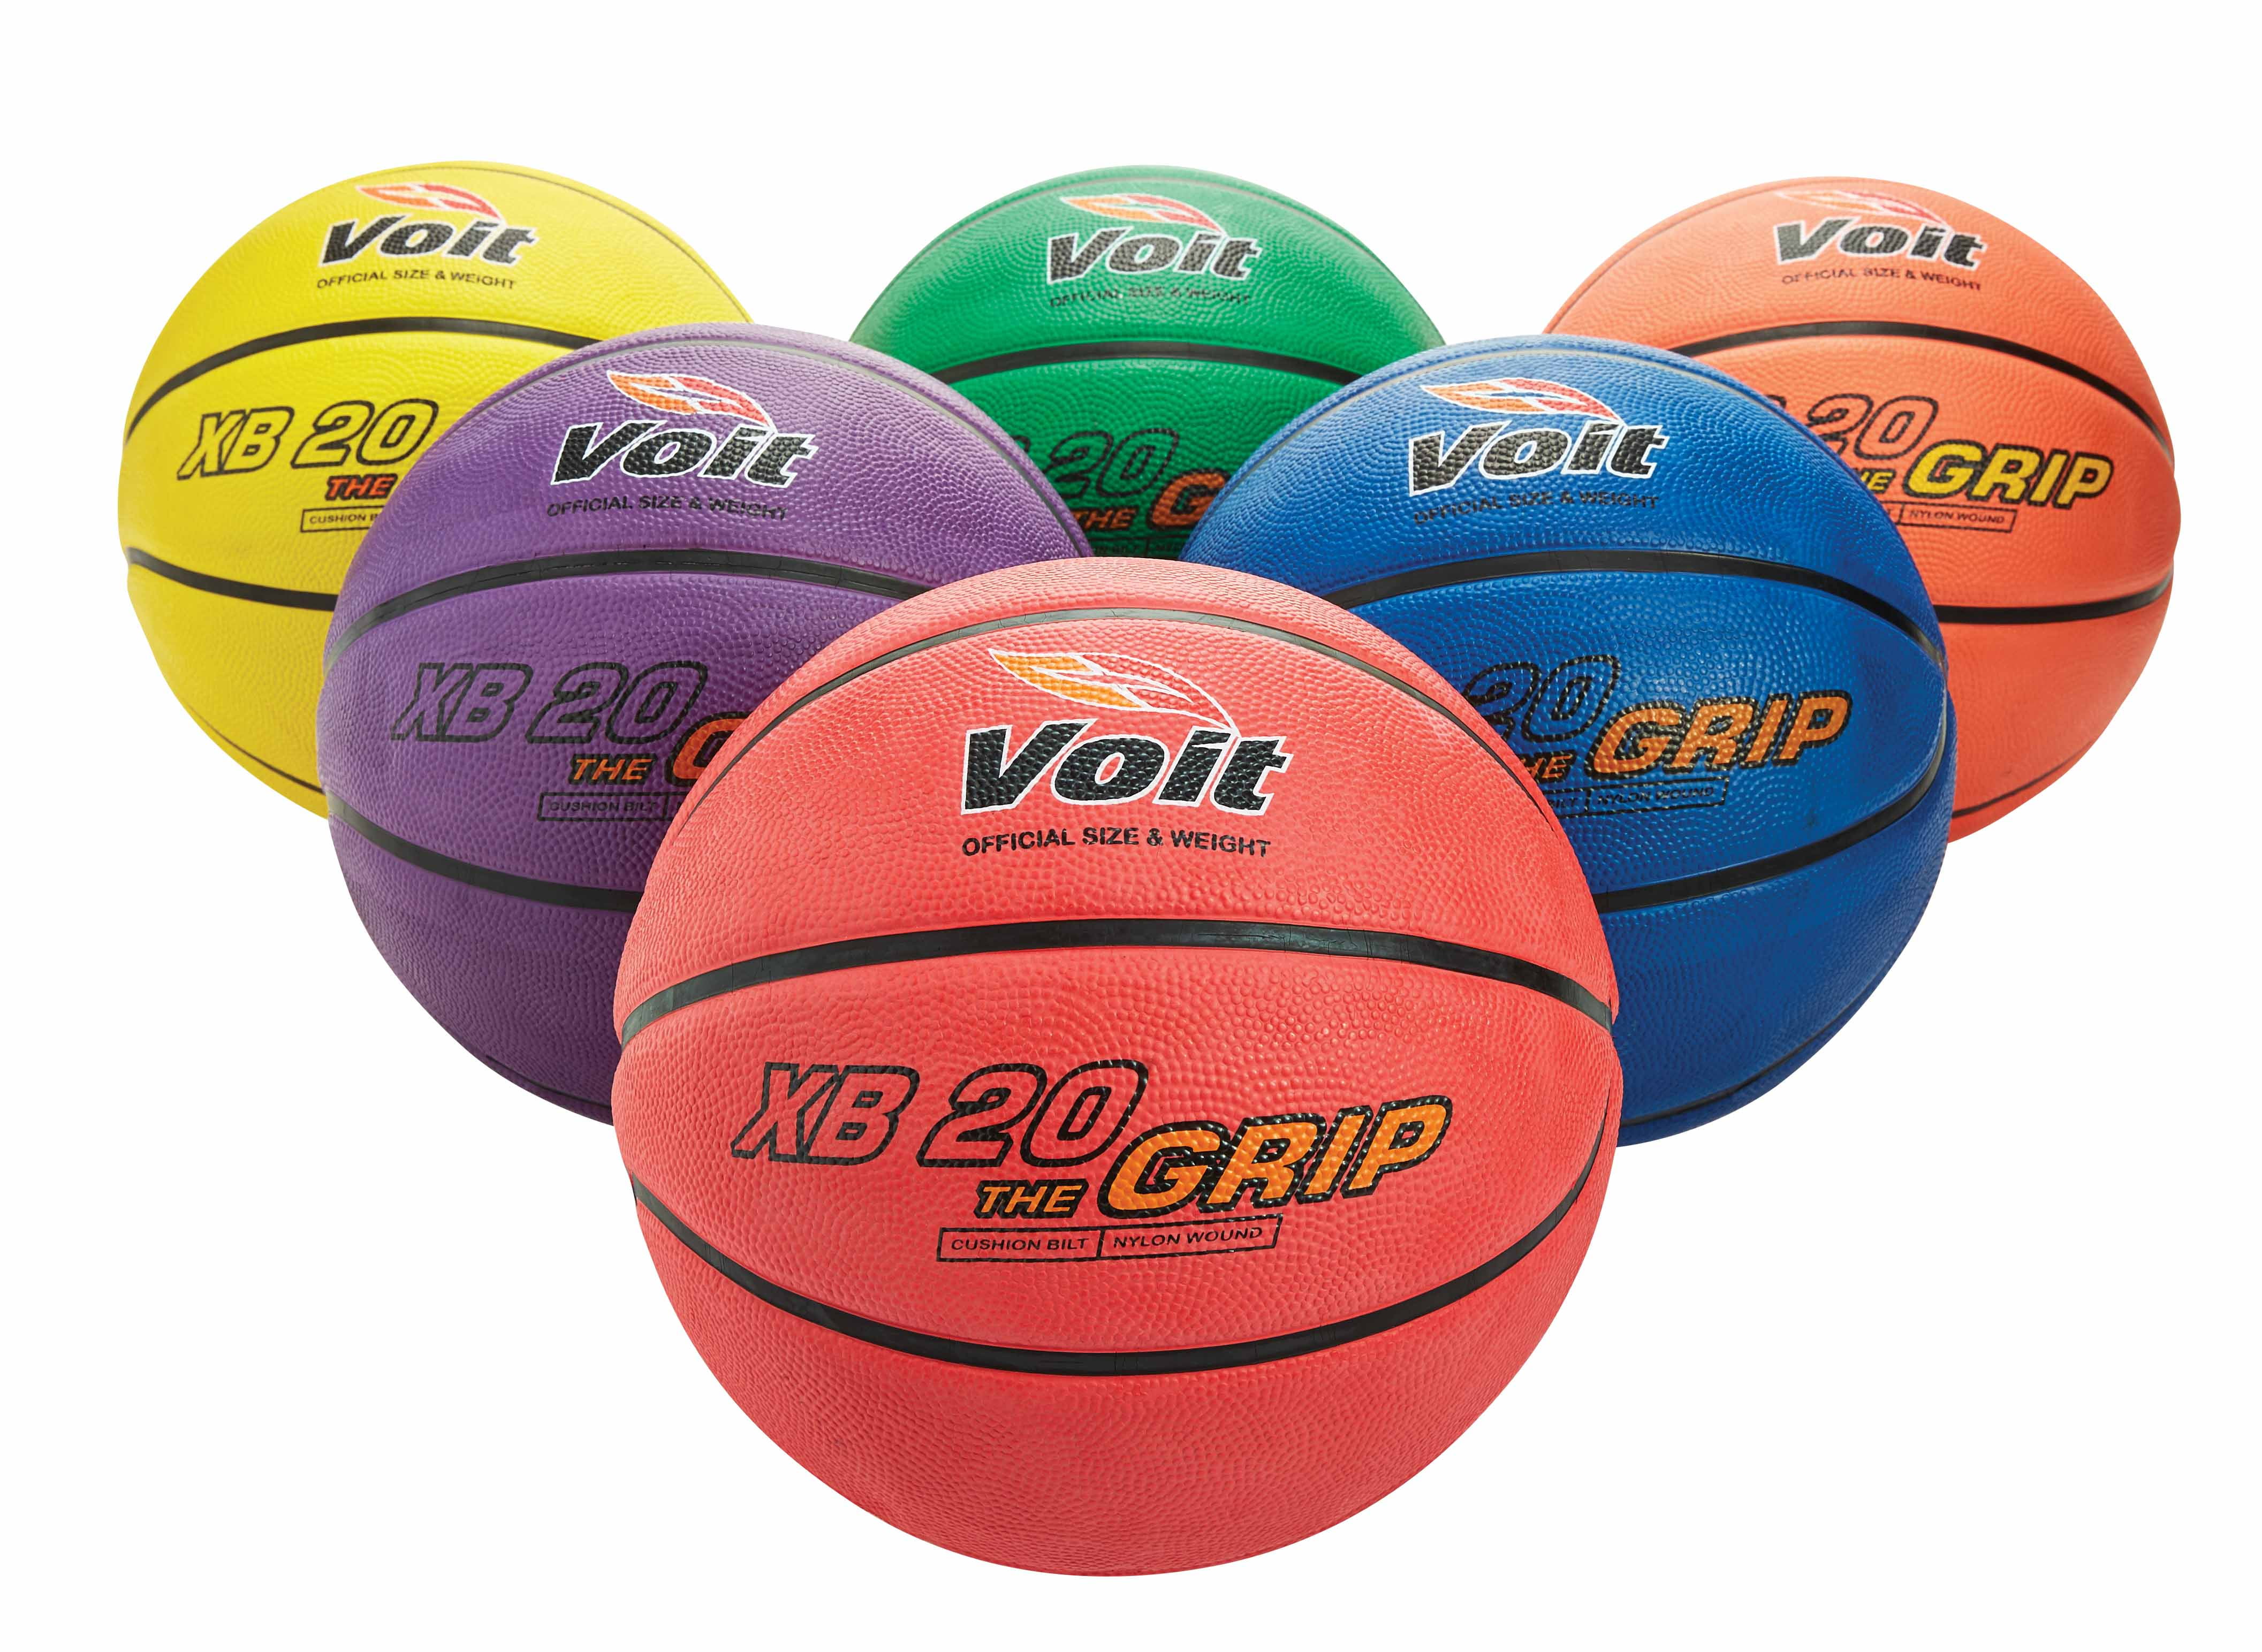 Perfect for Office or Bedroom Mini Hoops GoSports 7" Mini Basketball 3 Pack 